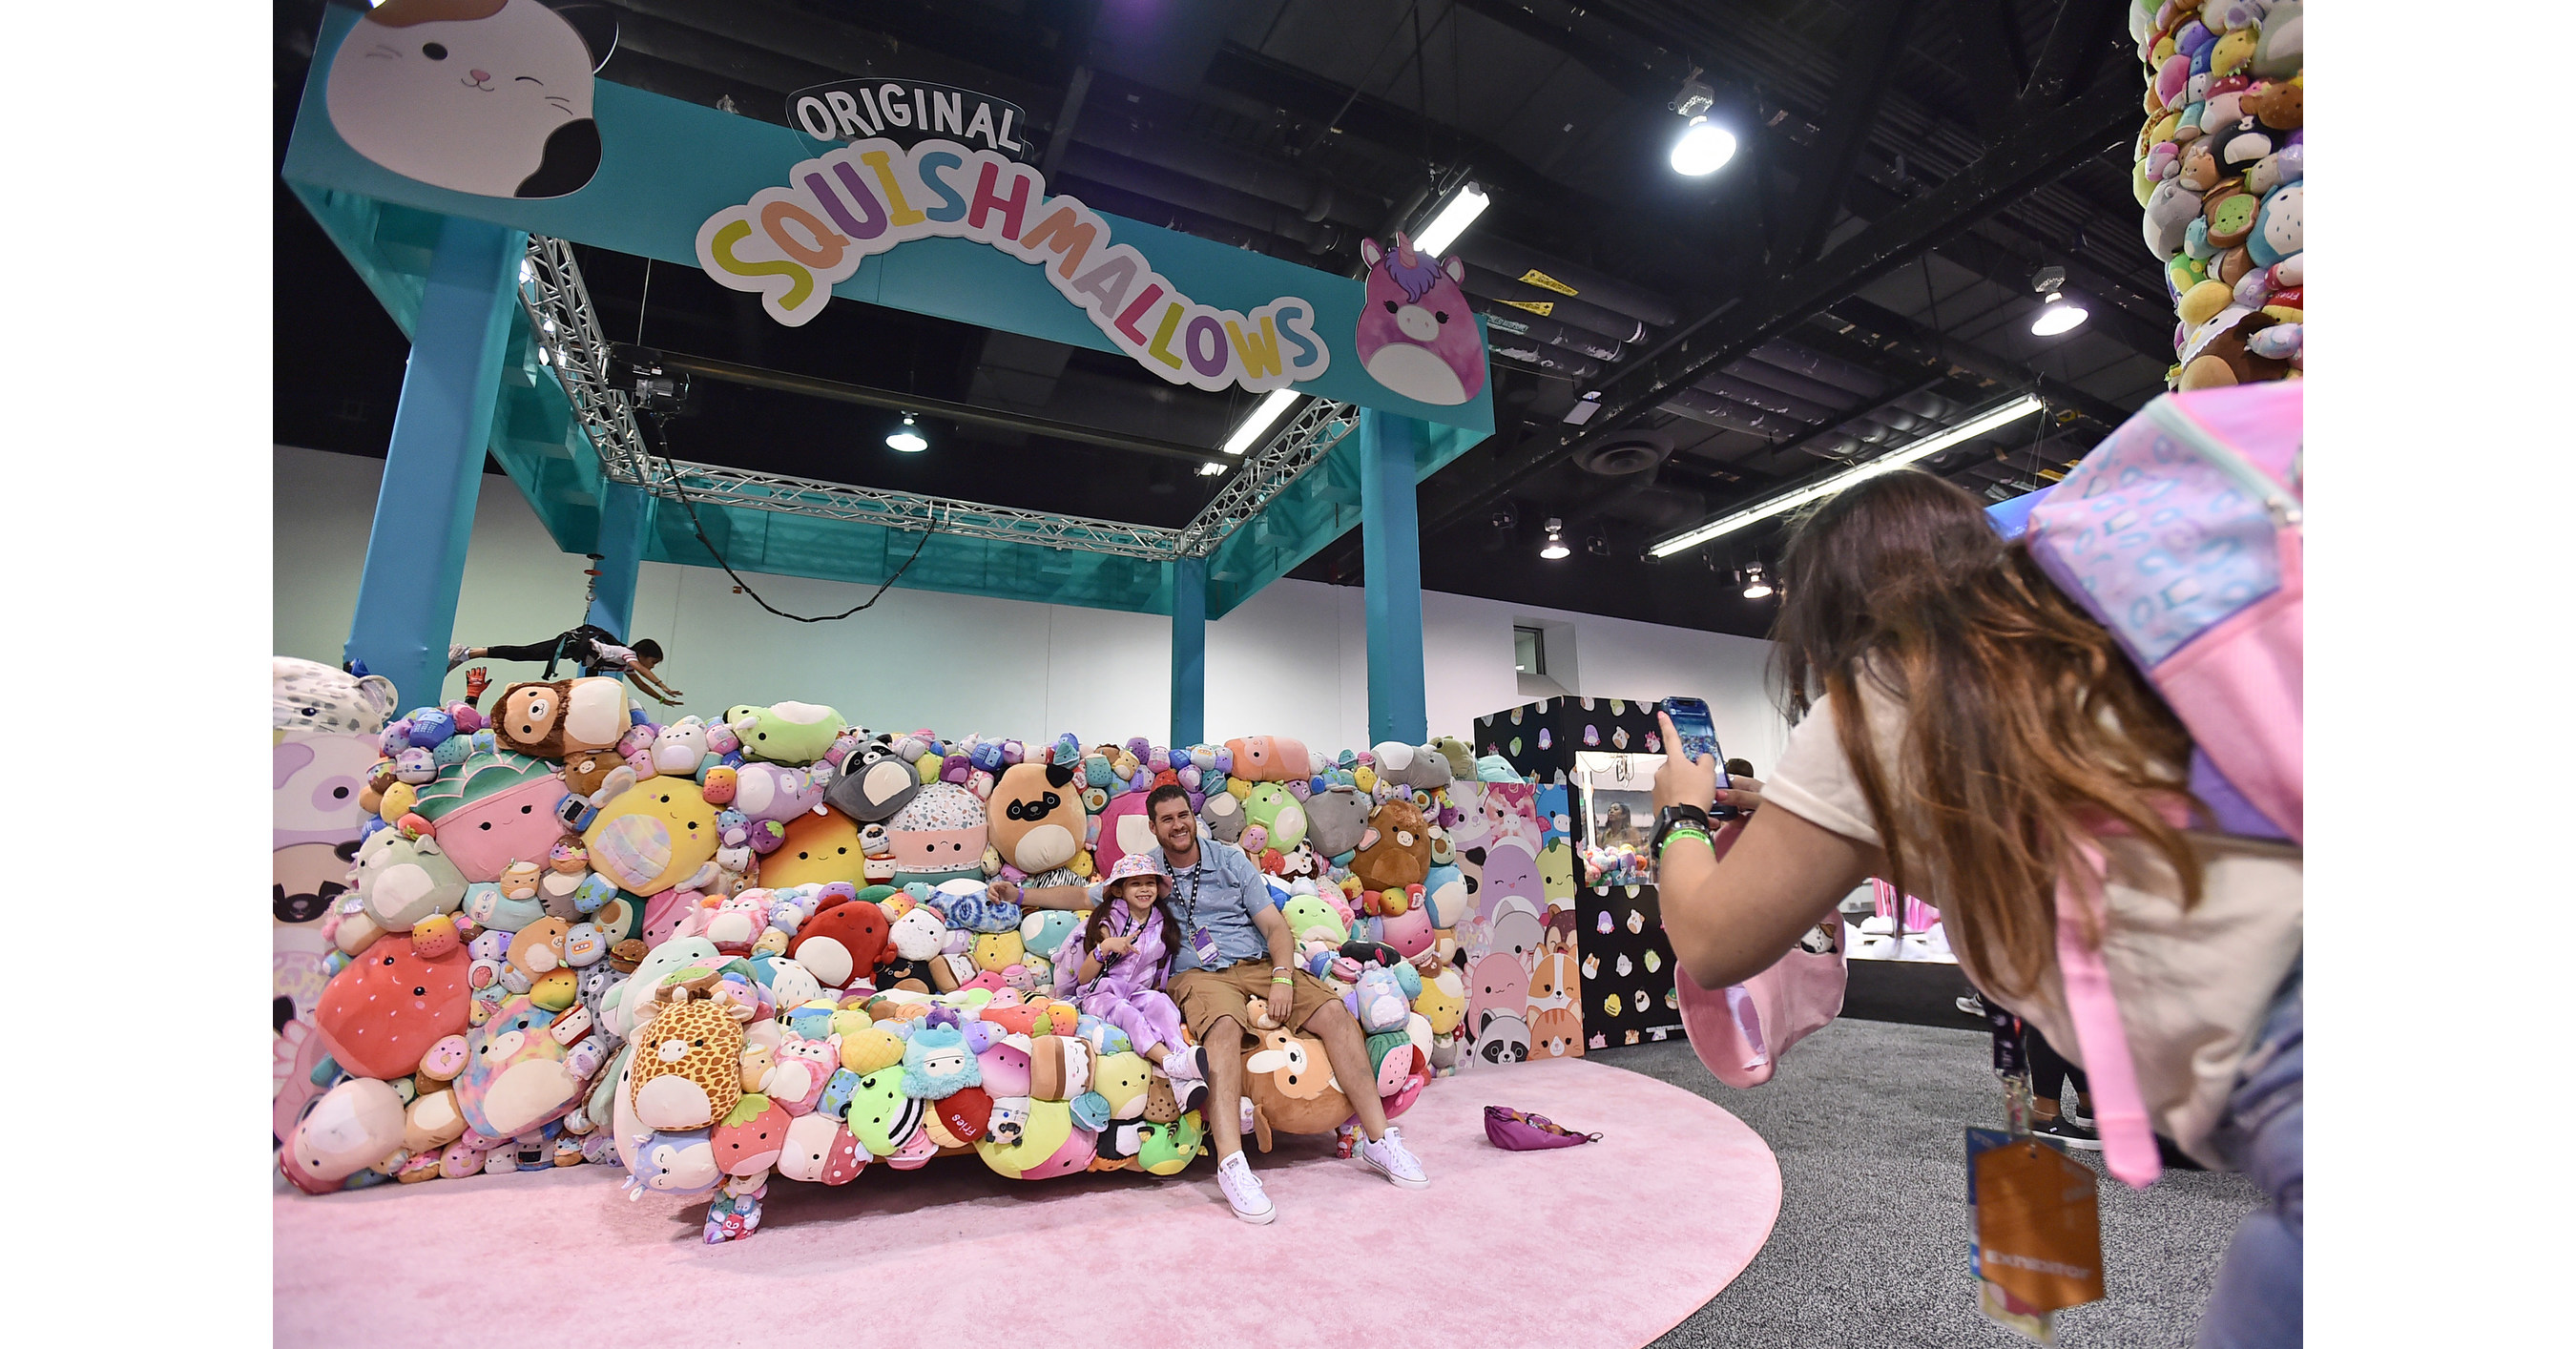 JAZWARES INVITES FANS TO "SQUISH INTO" VIDCON U.S. WITH FIRSTEVER LIFE